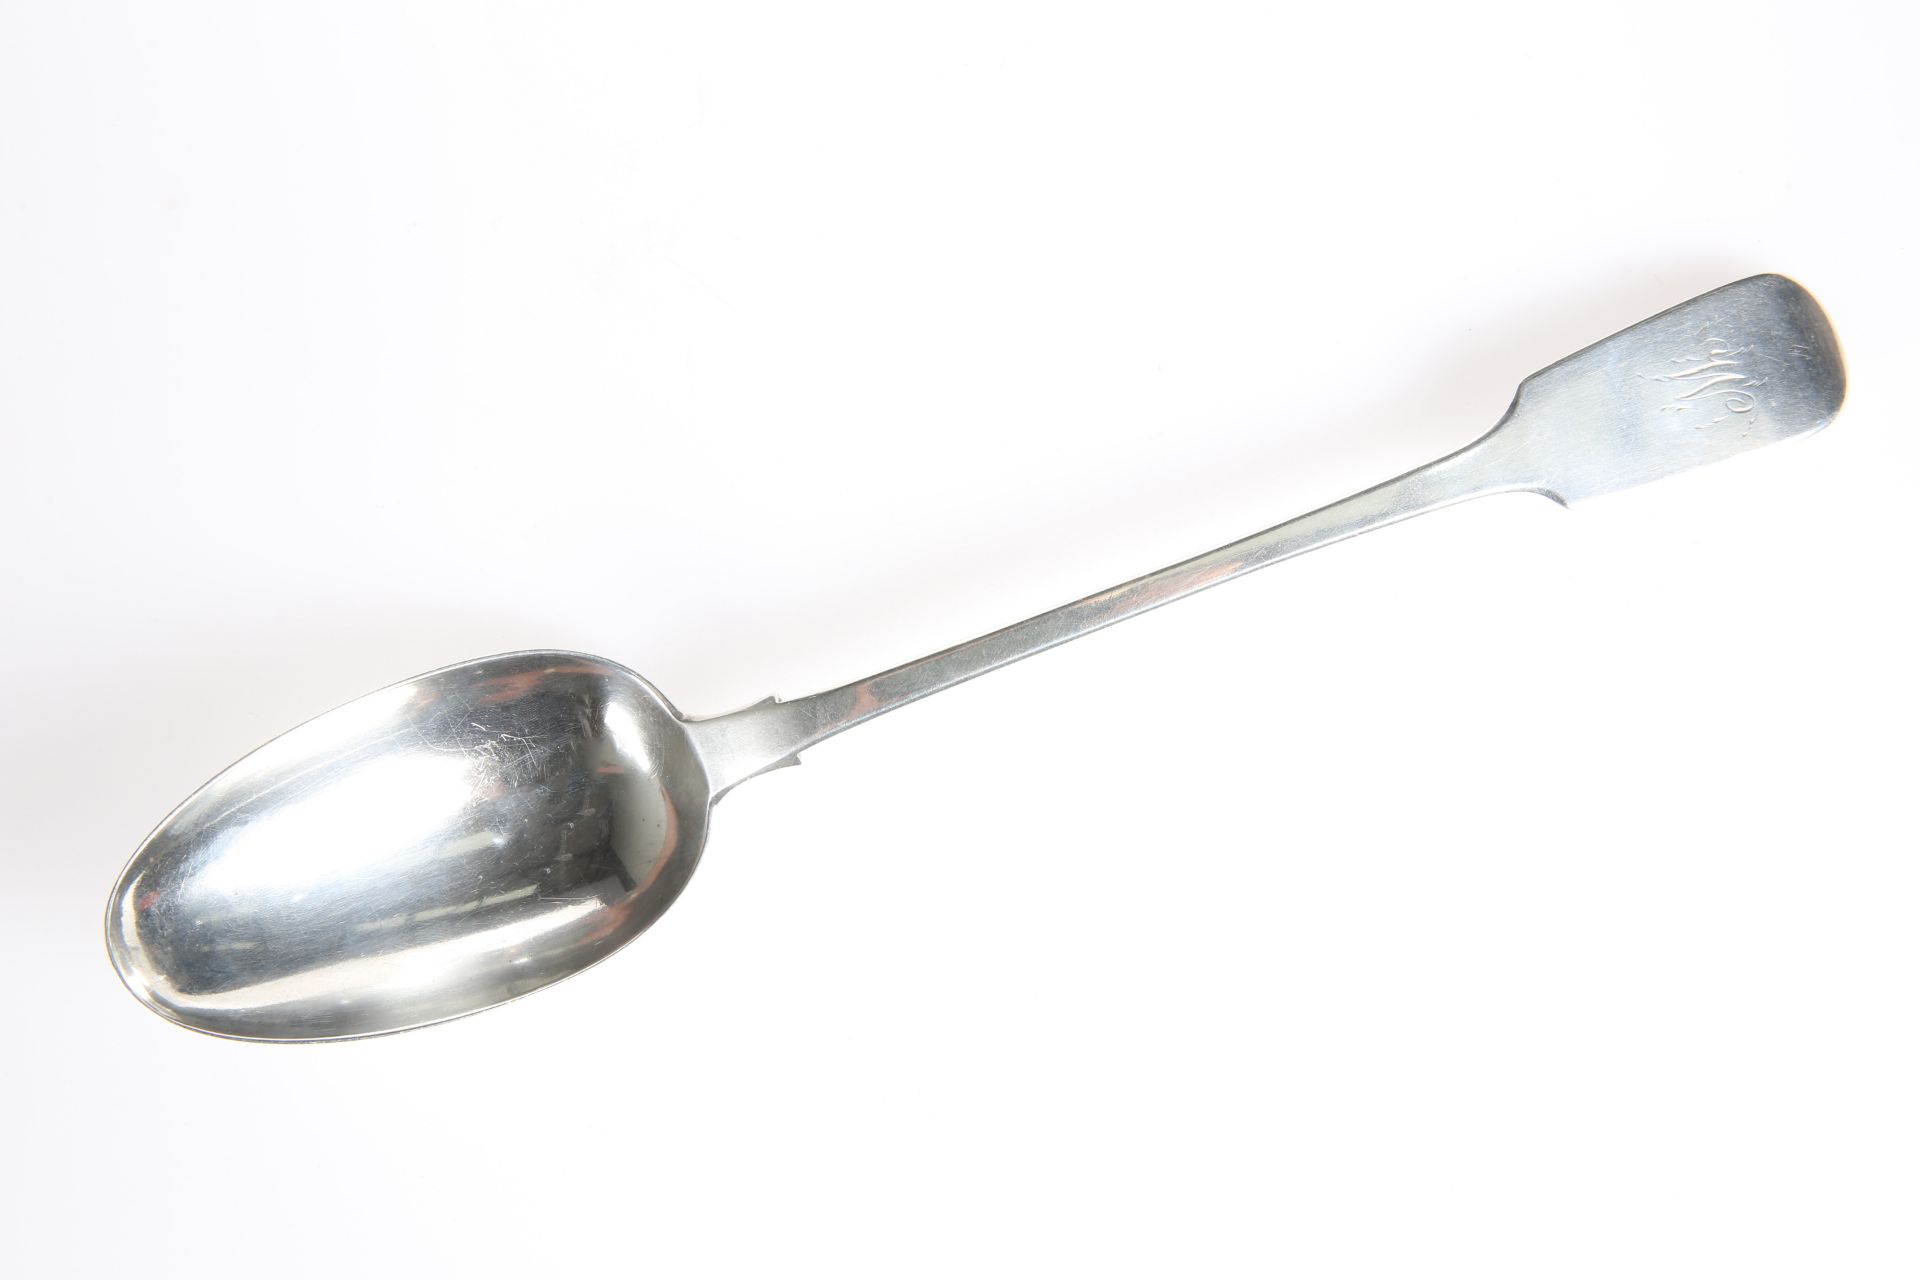 A VICTORIAN PROVINCIAL SILVER BASTING SPOON WITH YORK TOWN MARK, by James Barber & William North,